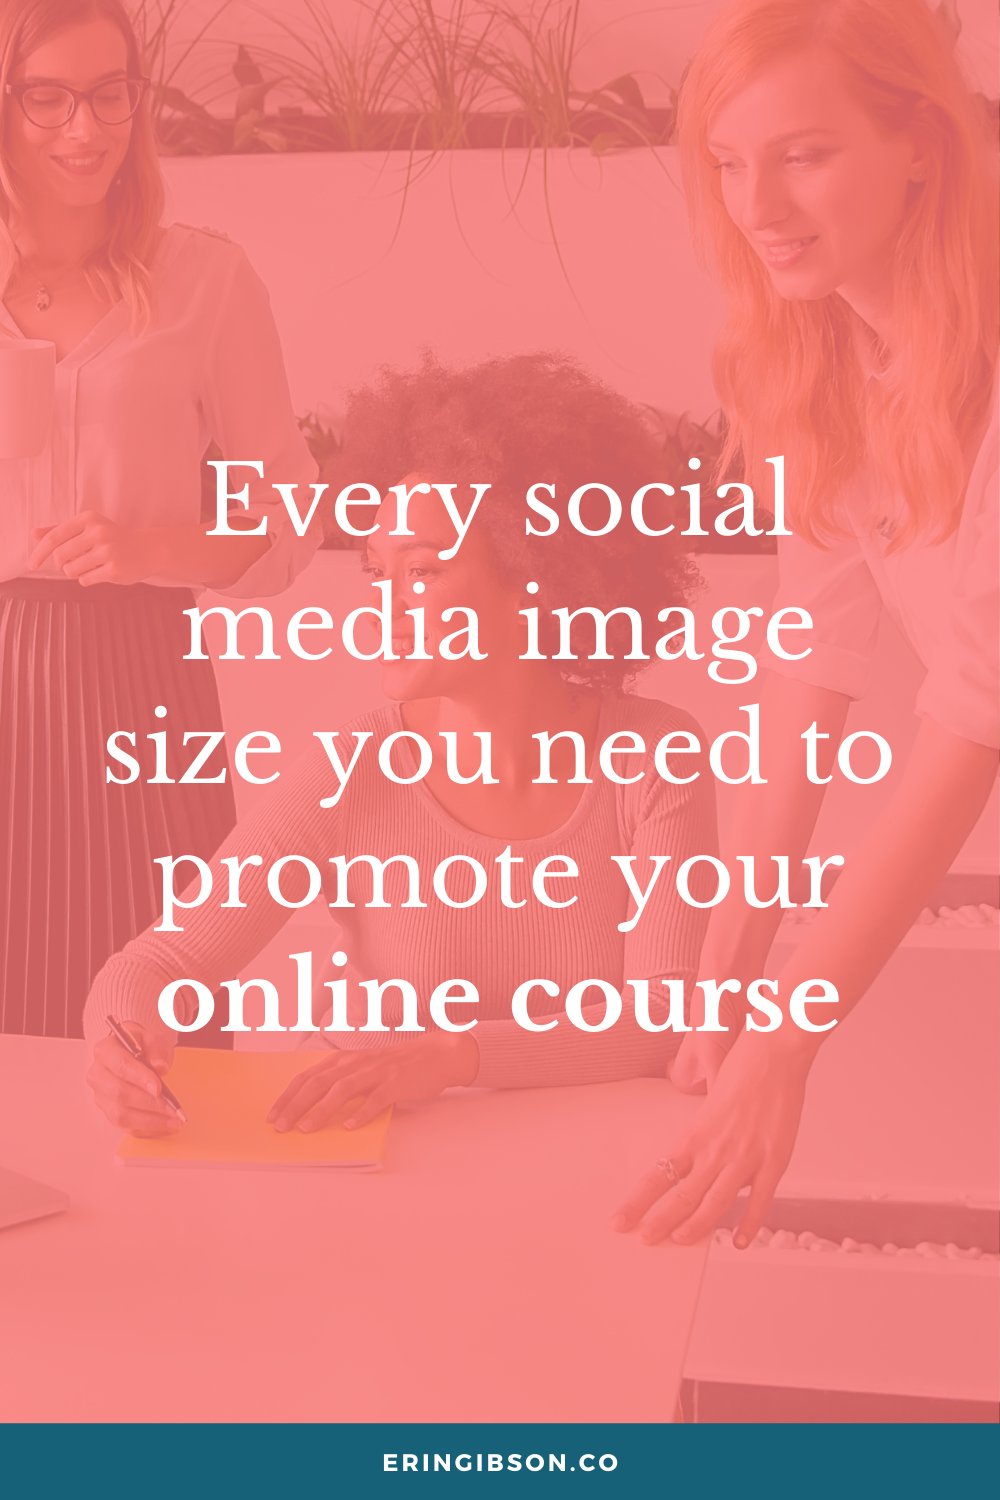 Every social media image size you need to promote your course in 2022